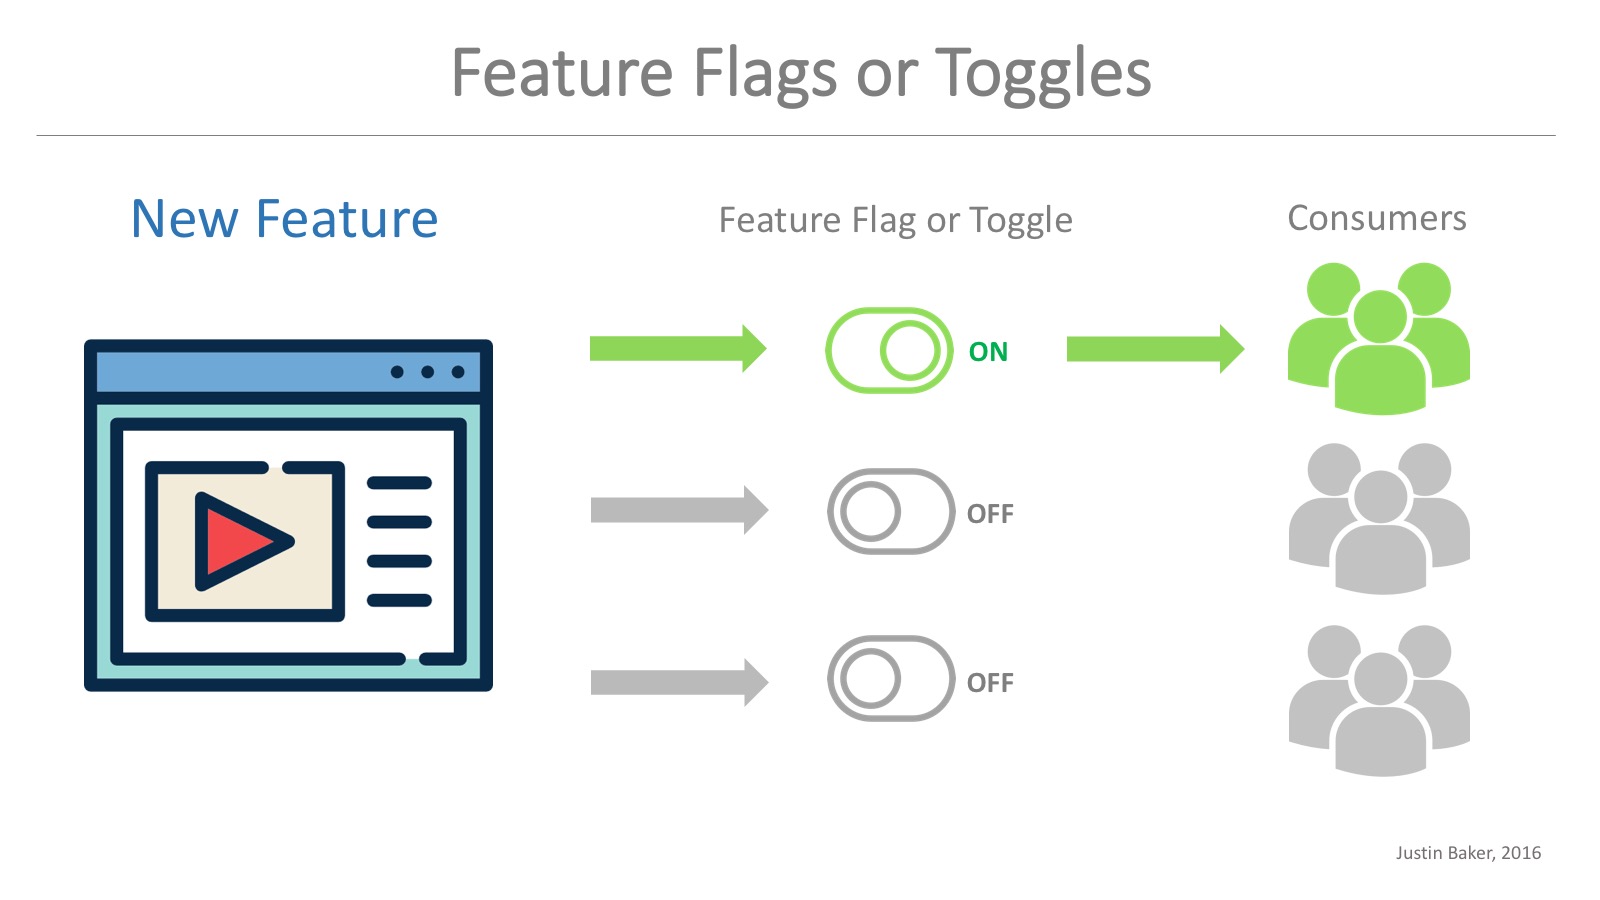 Nom : flags-or-toggles.jpg
Affichages : 9507
Taille : 108,4 Ko